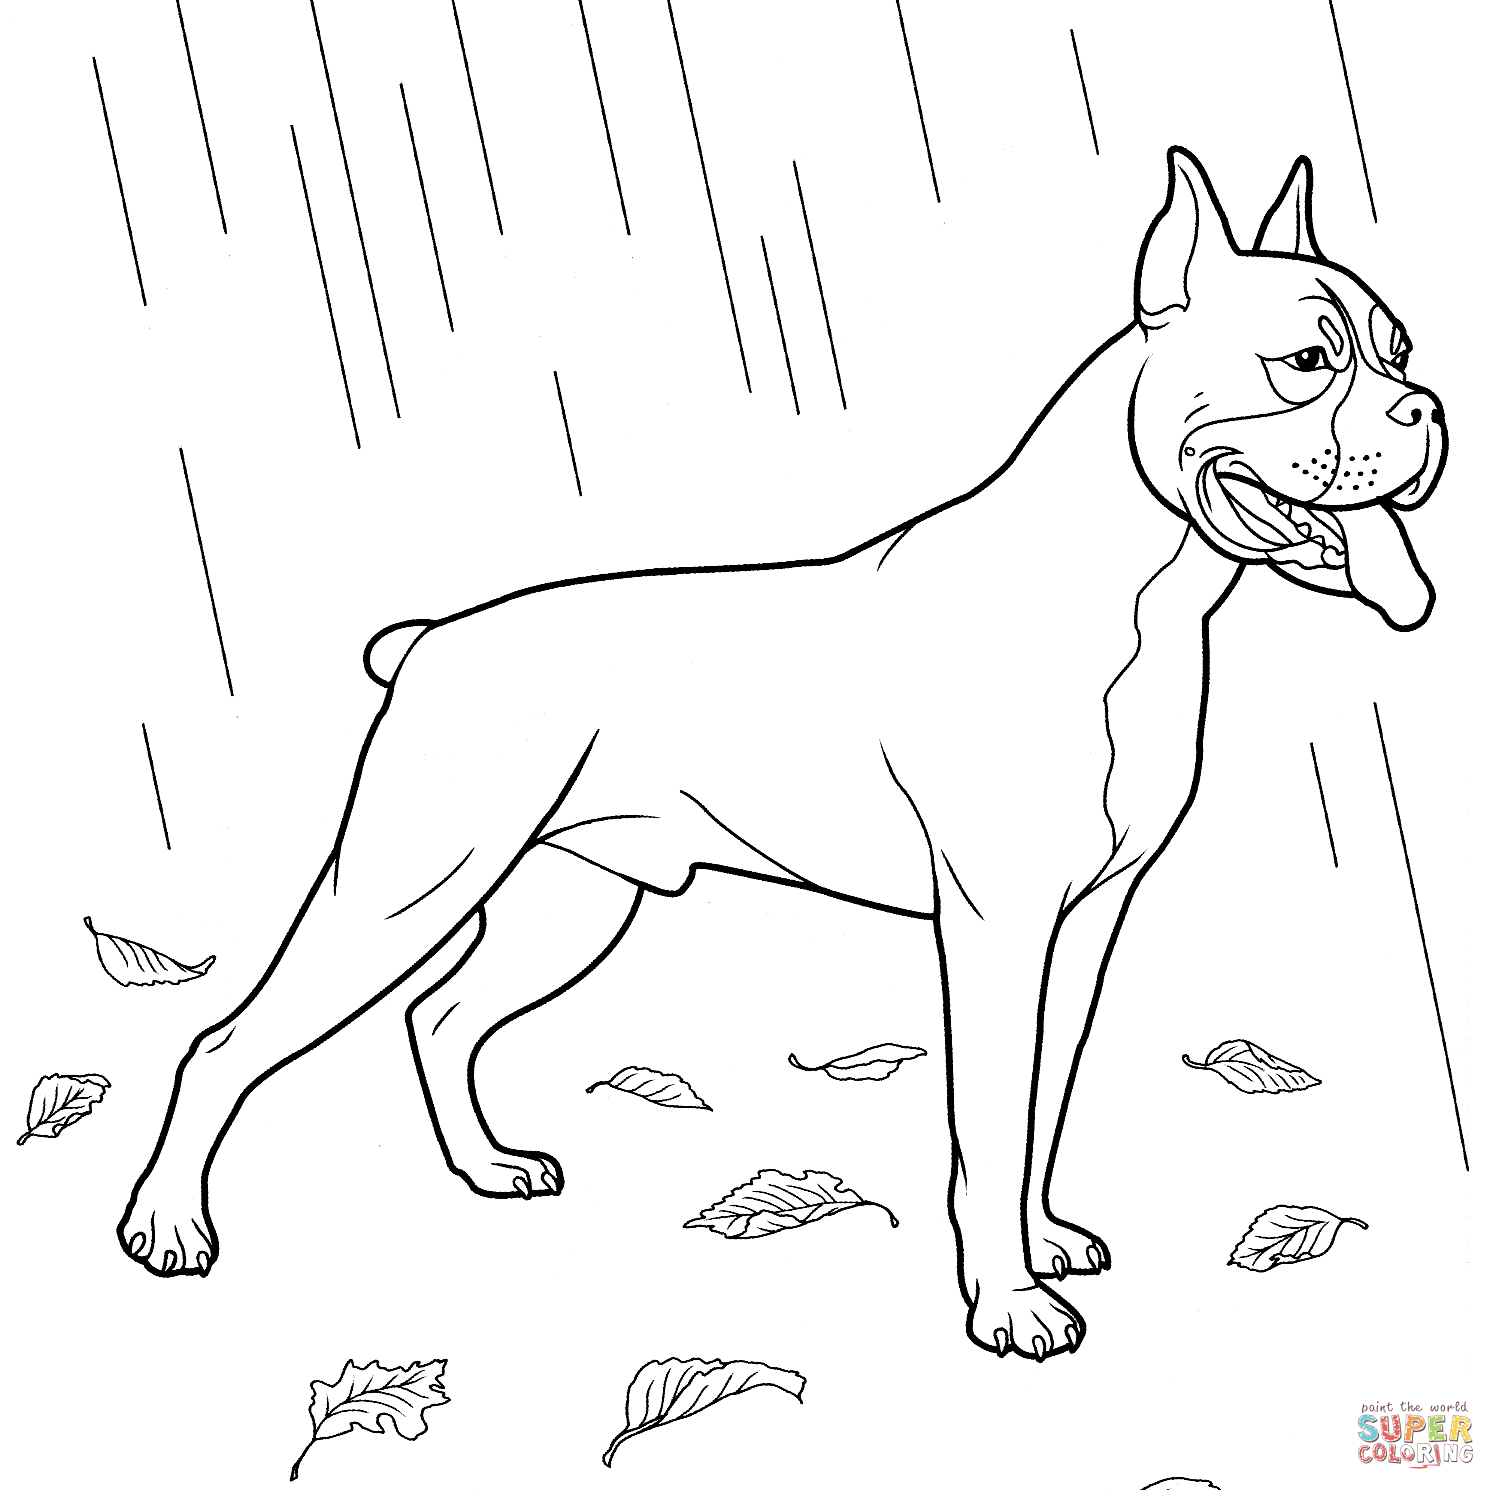 Dachshund Dog Coloring Page Free Printable Coloring Pages Weiner ...